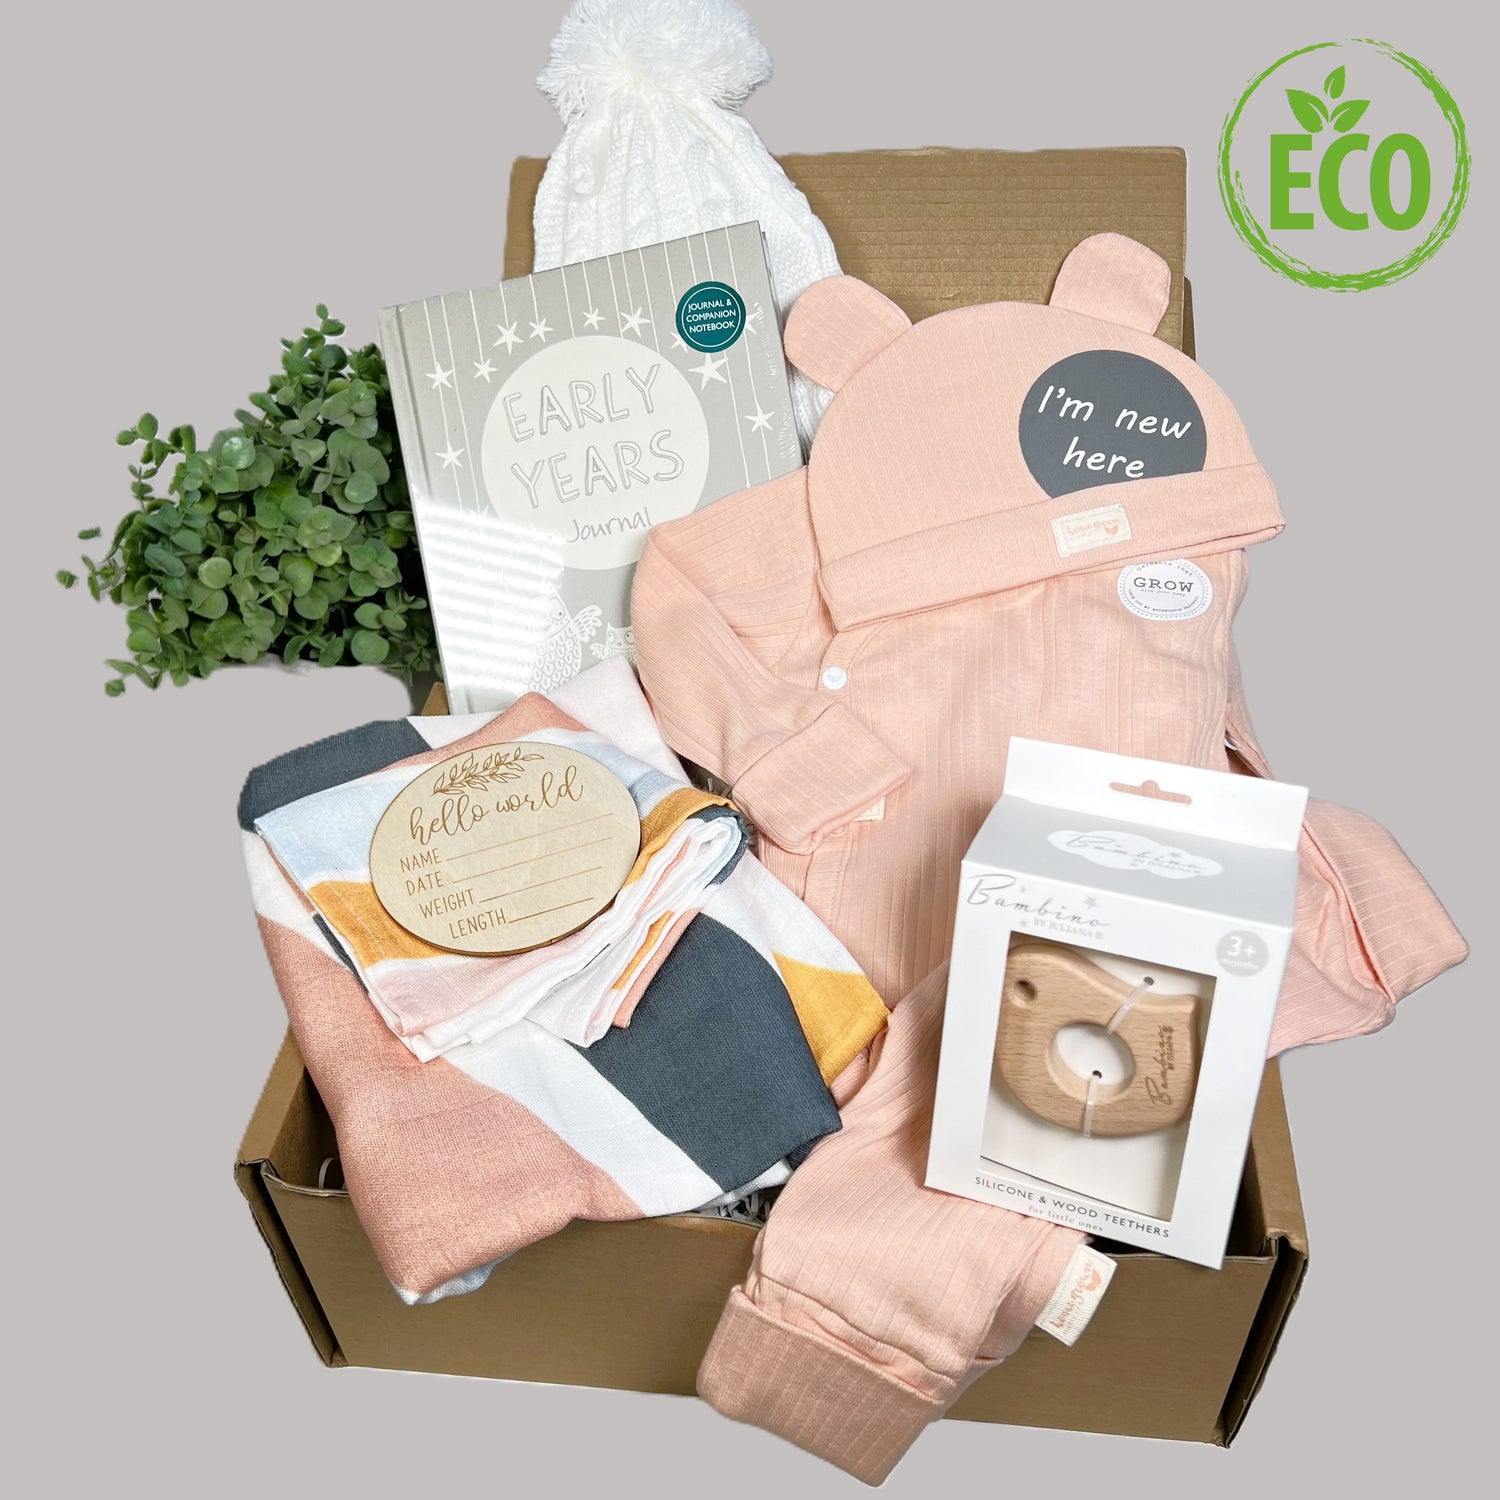 New baby girl gift hamper full of eco friendly new baby essentials to include prganic cotton rainbow swaddle blankets and muslin square, organic cotton peach layette set, Bambino bird teether, baby pompom hat and an early years baby journal.